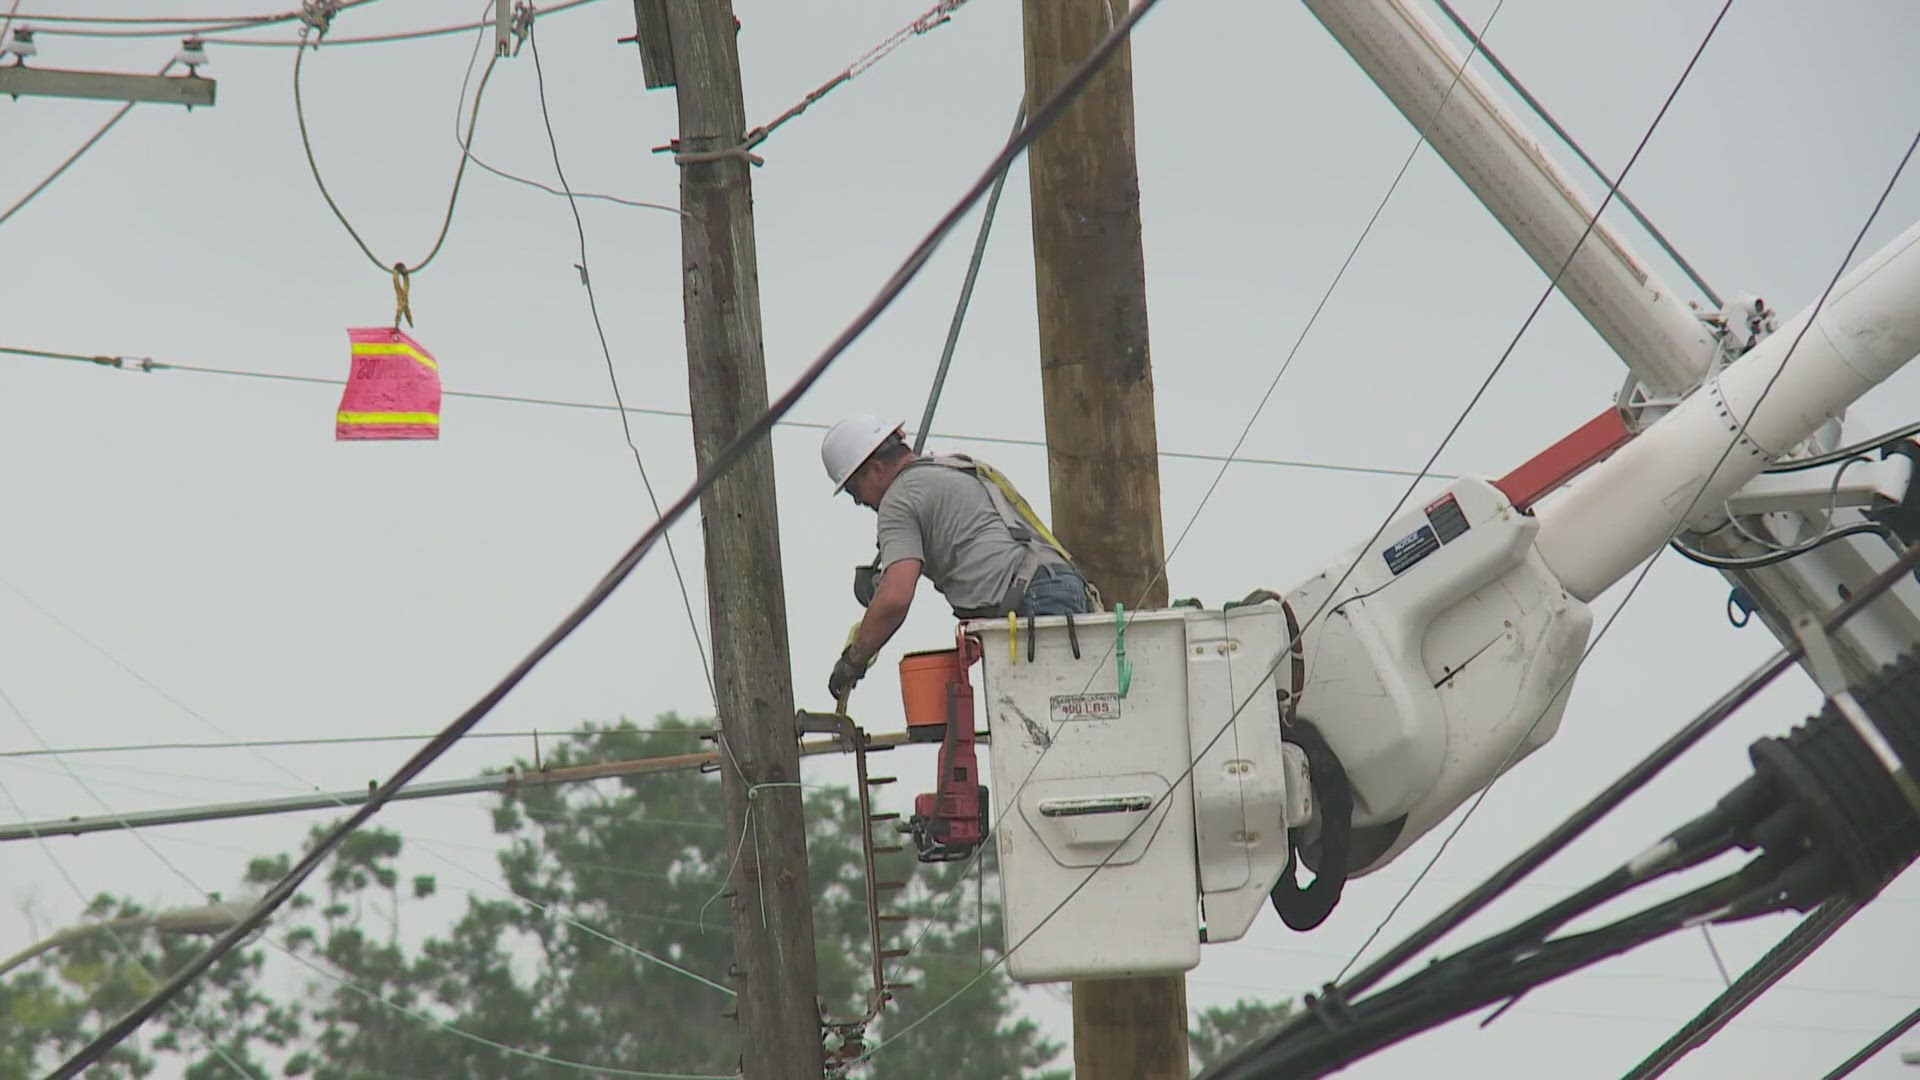 Parts of the southern side of Kenner had major power outages Friday after two transmission lines were downed in the high winds.